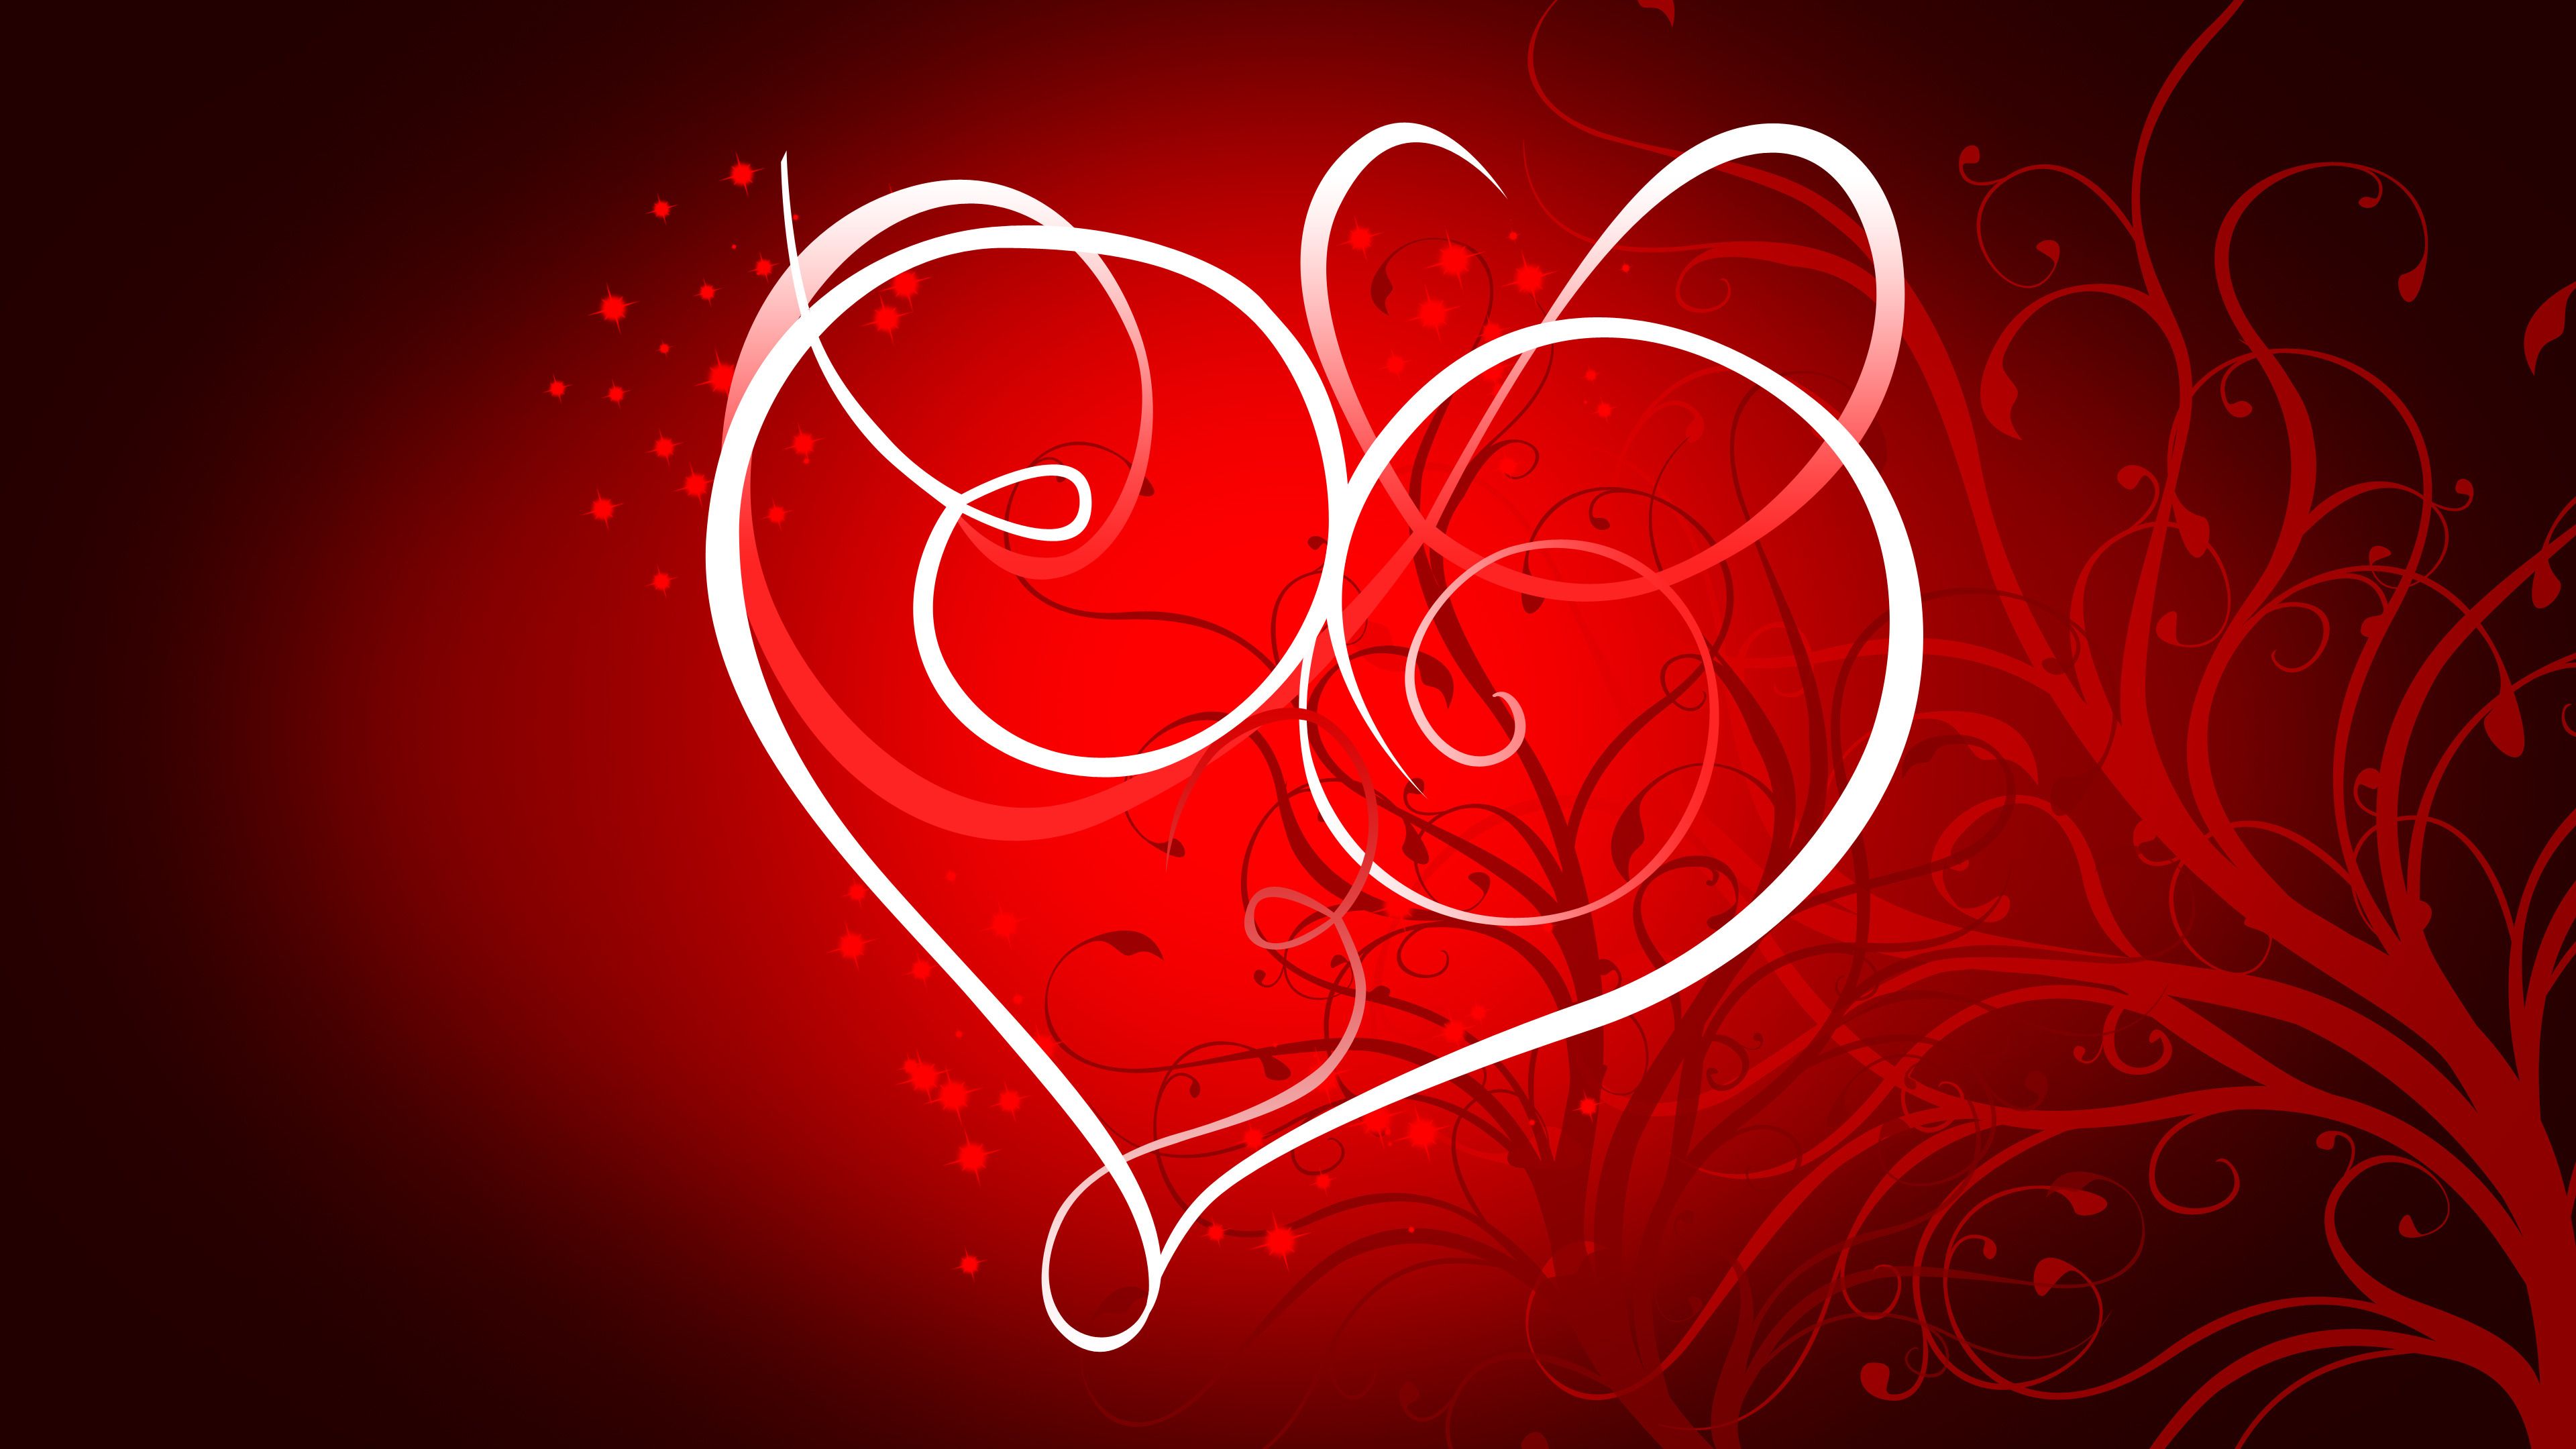 Download swirl love heart wallpapers | Ray blog